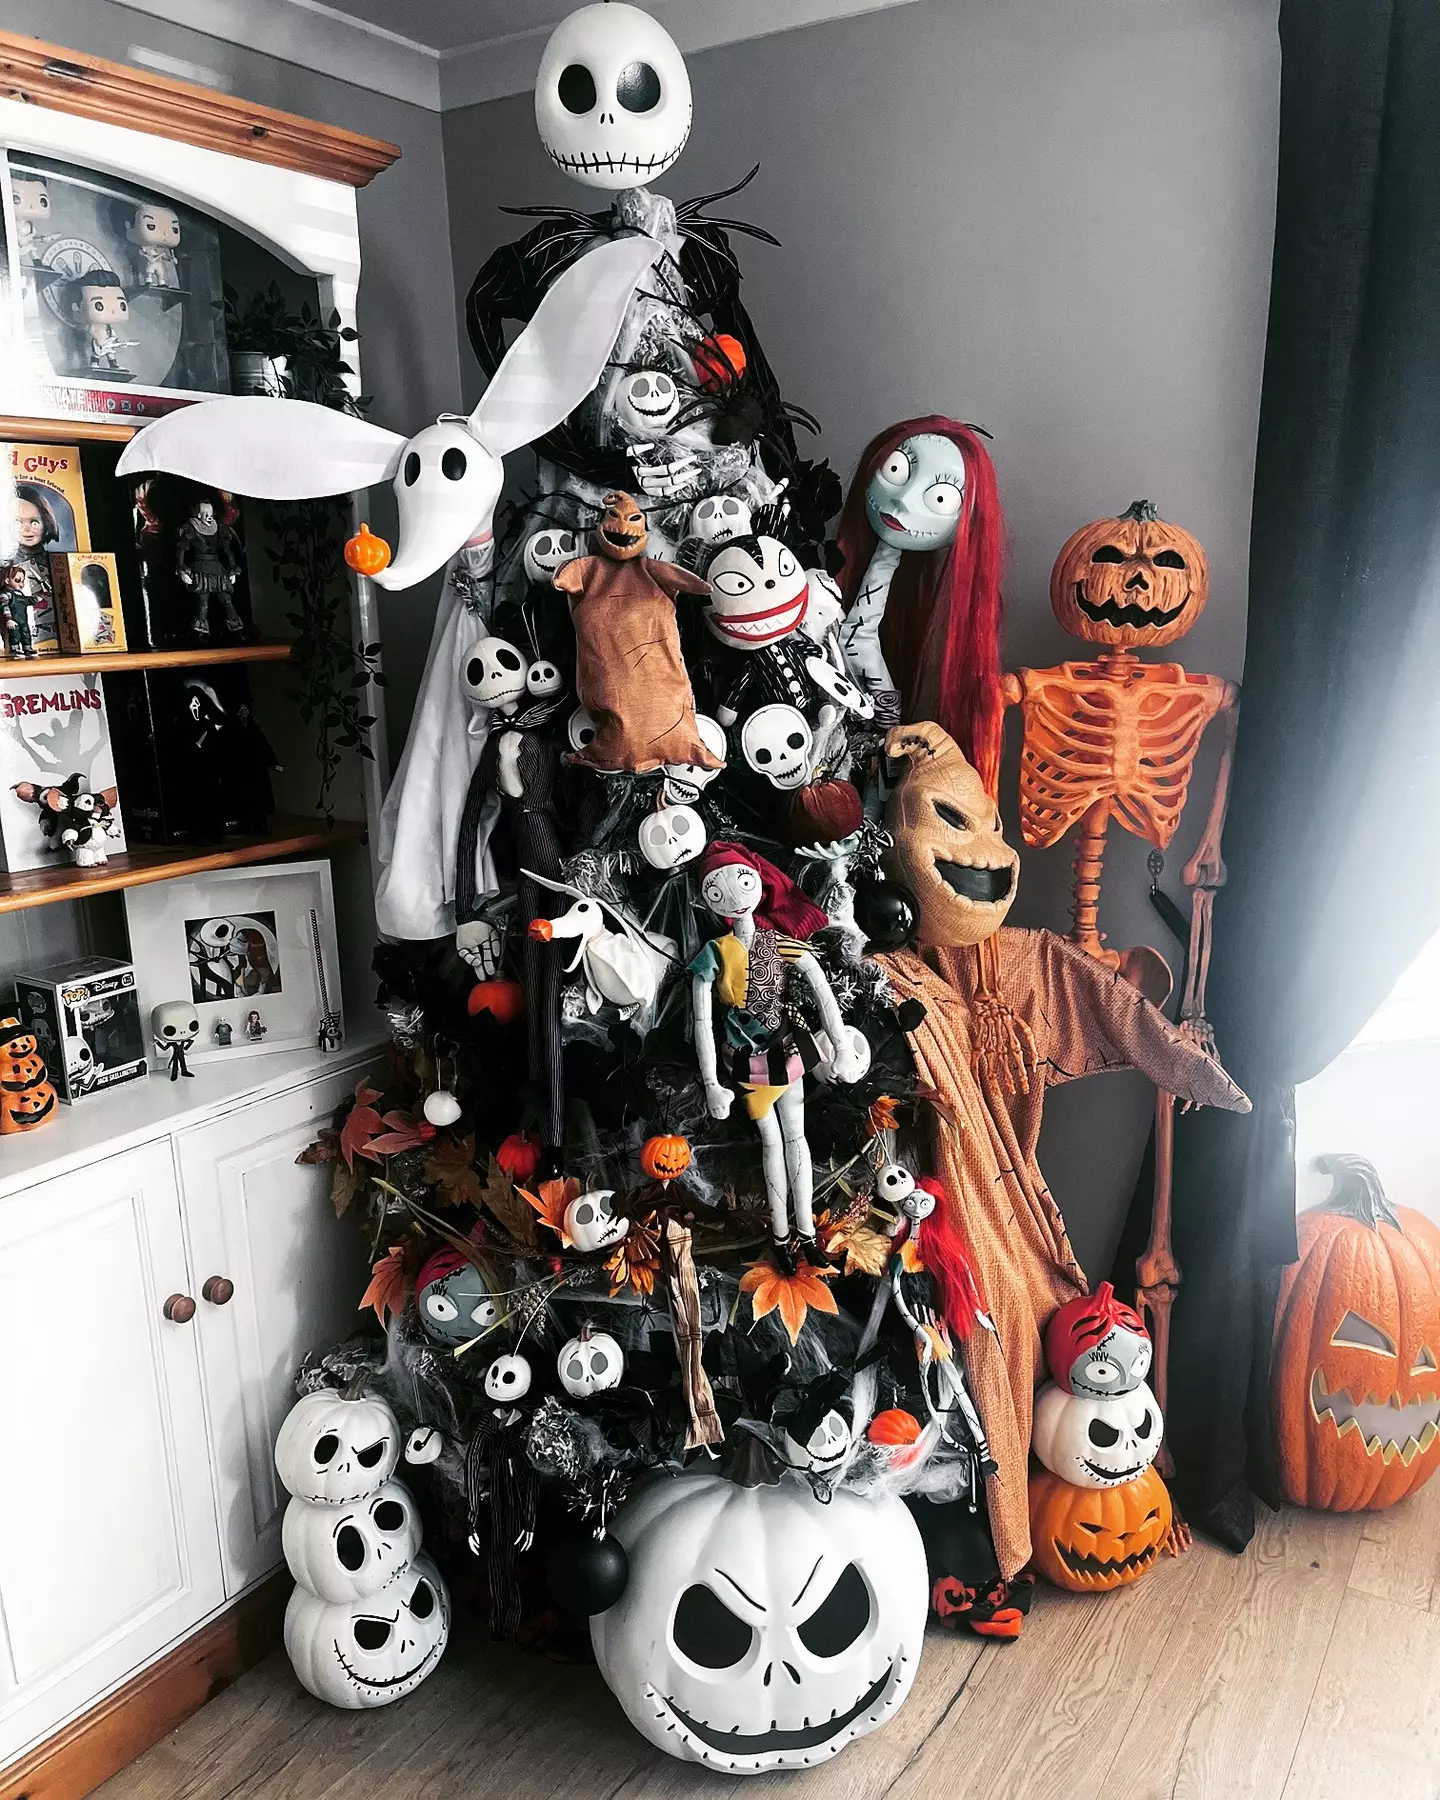 Even the Christmas tree get a macabre makeover.